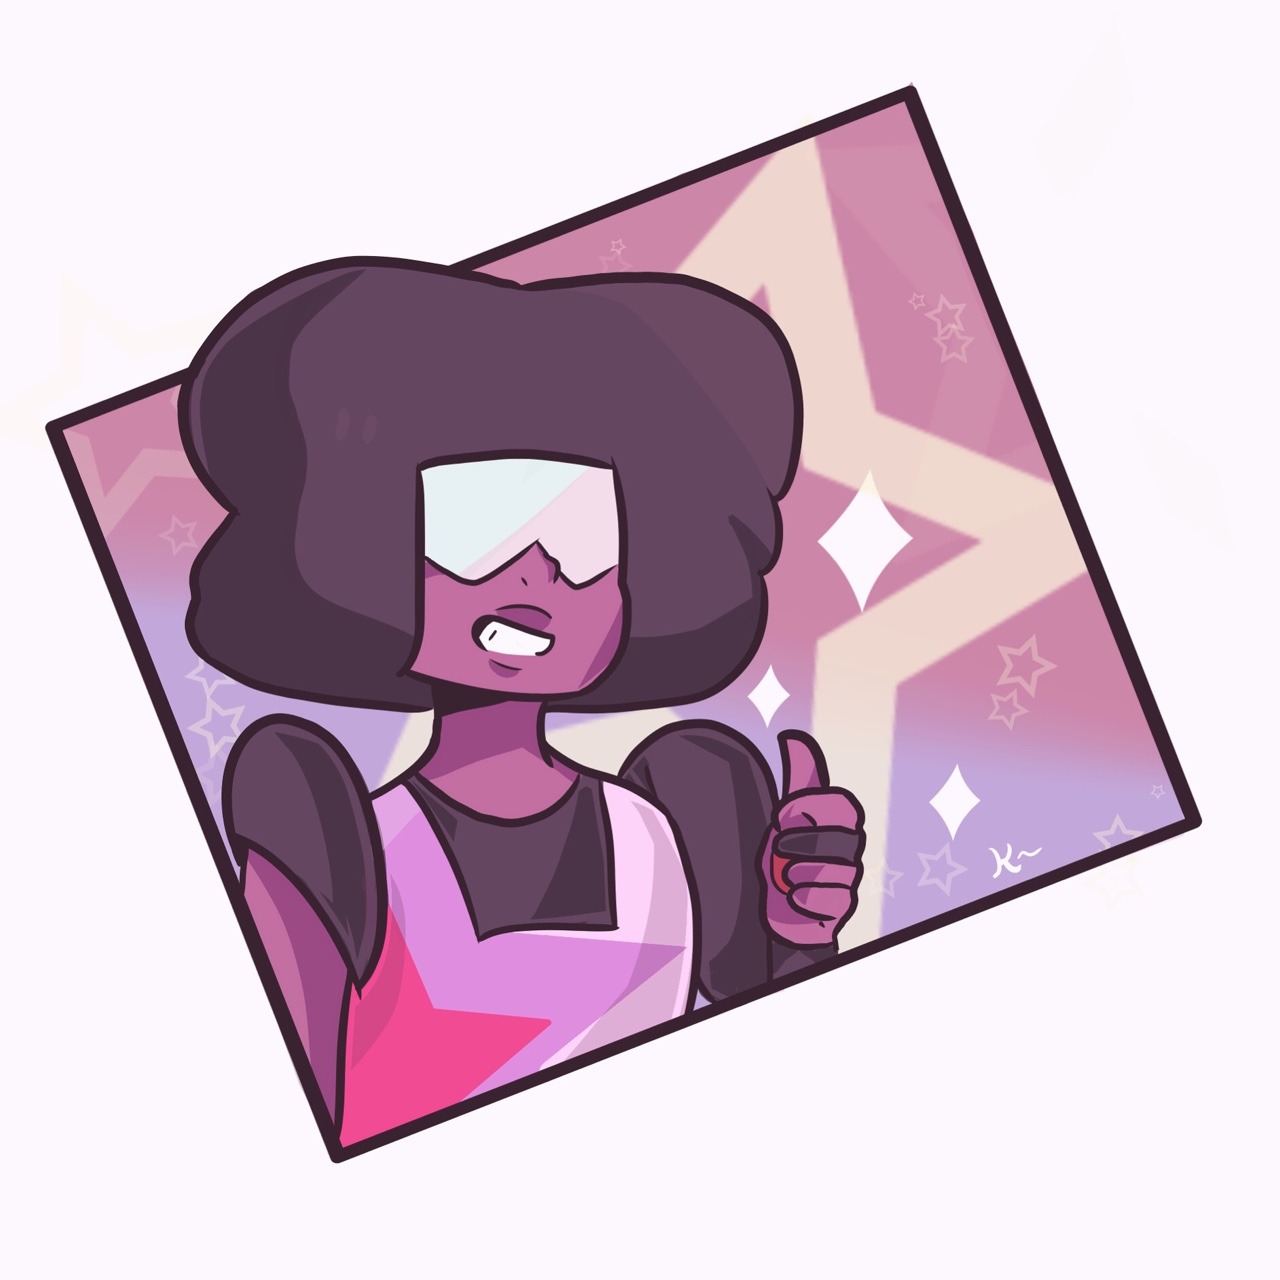 New Steven bomb was all filler but at least garnet had good screentime